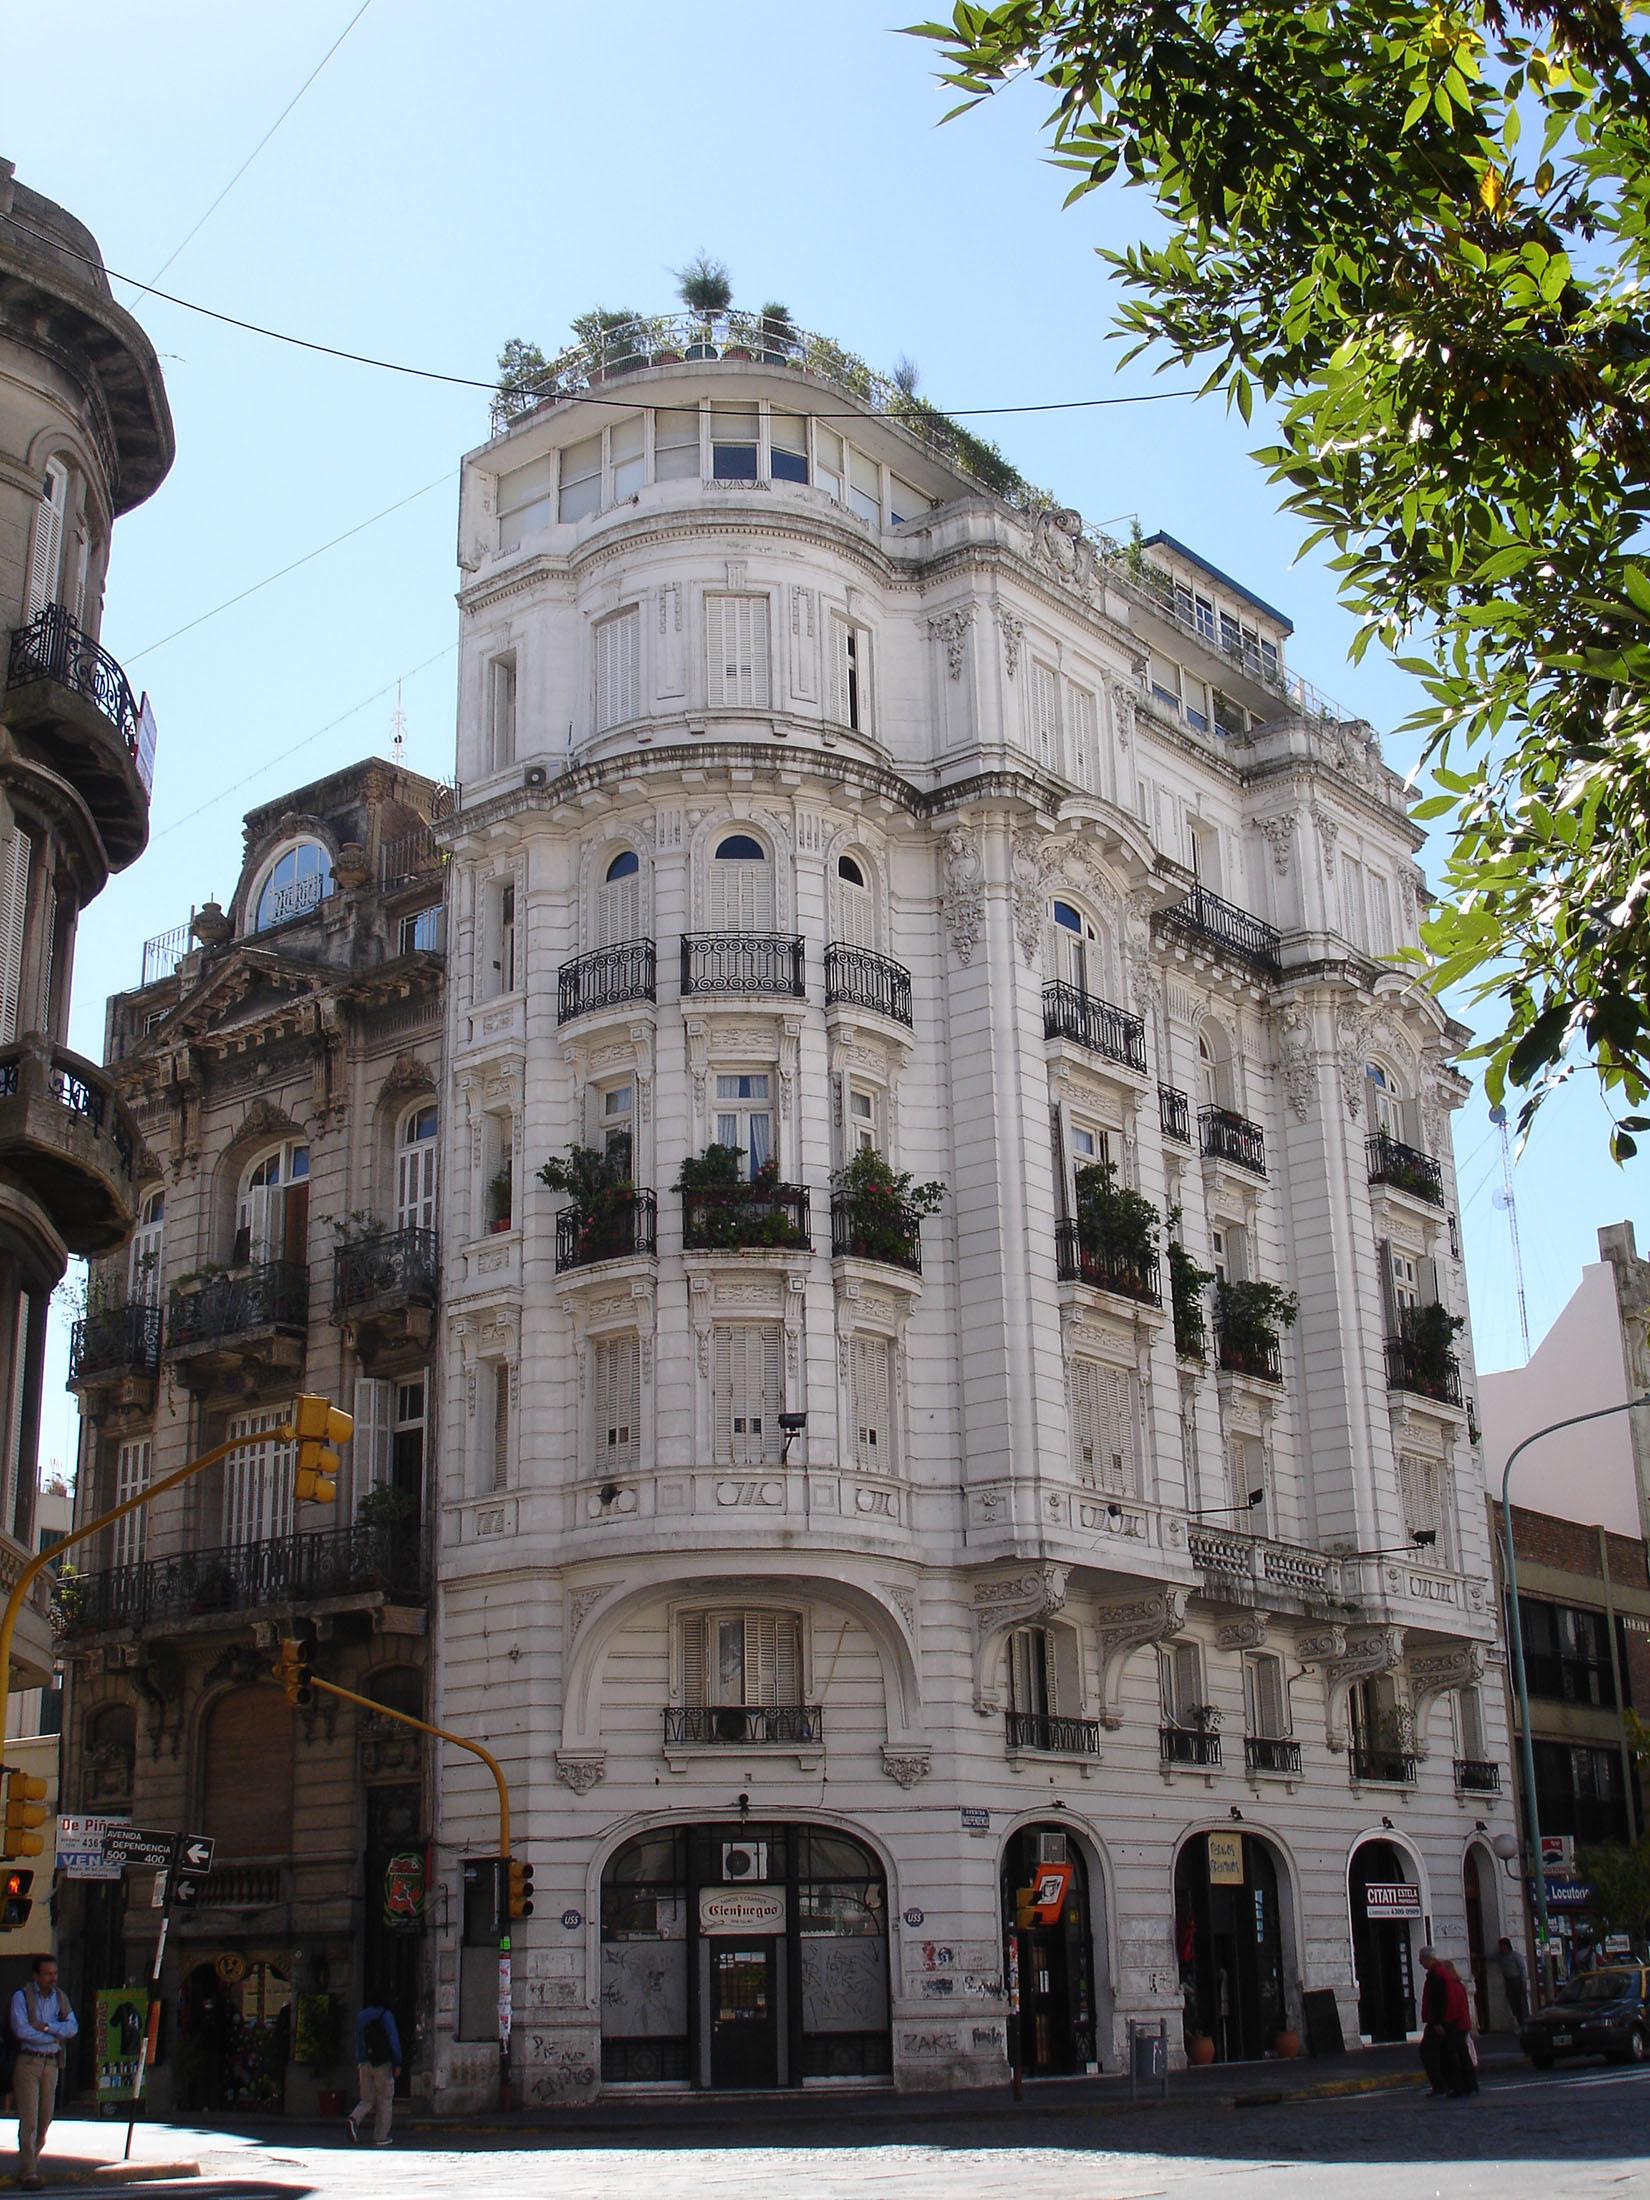 A Parisian style building in Buenos Aires Argentina